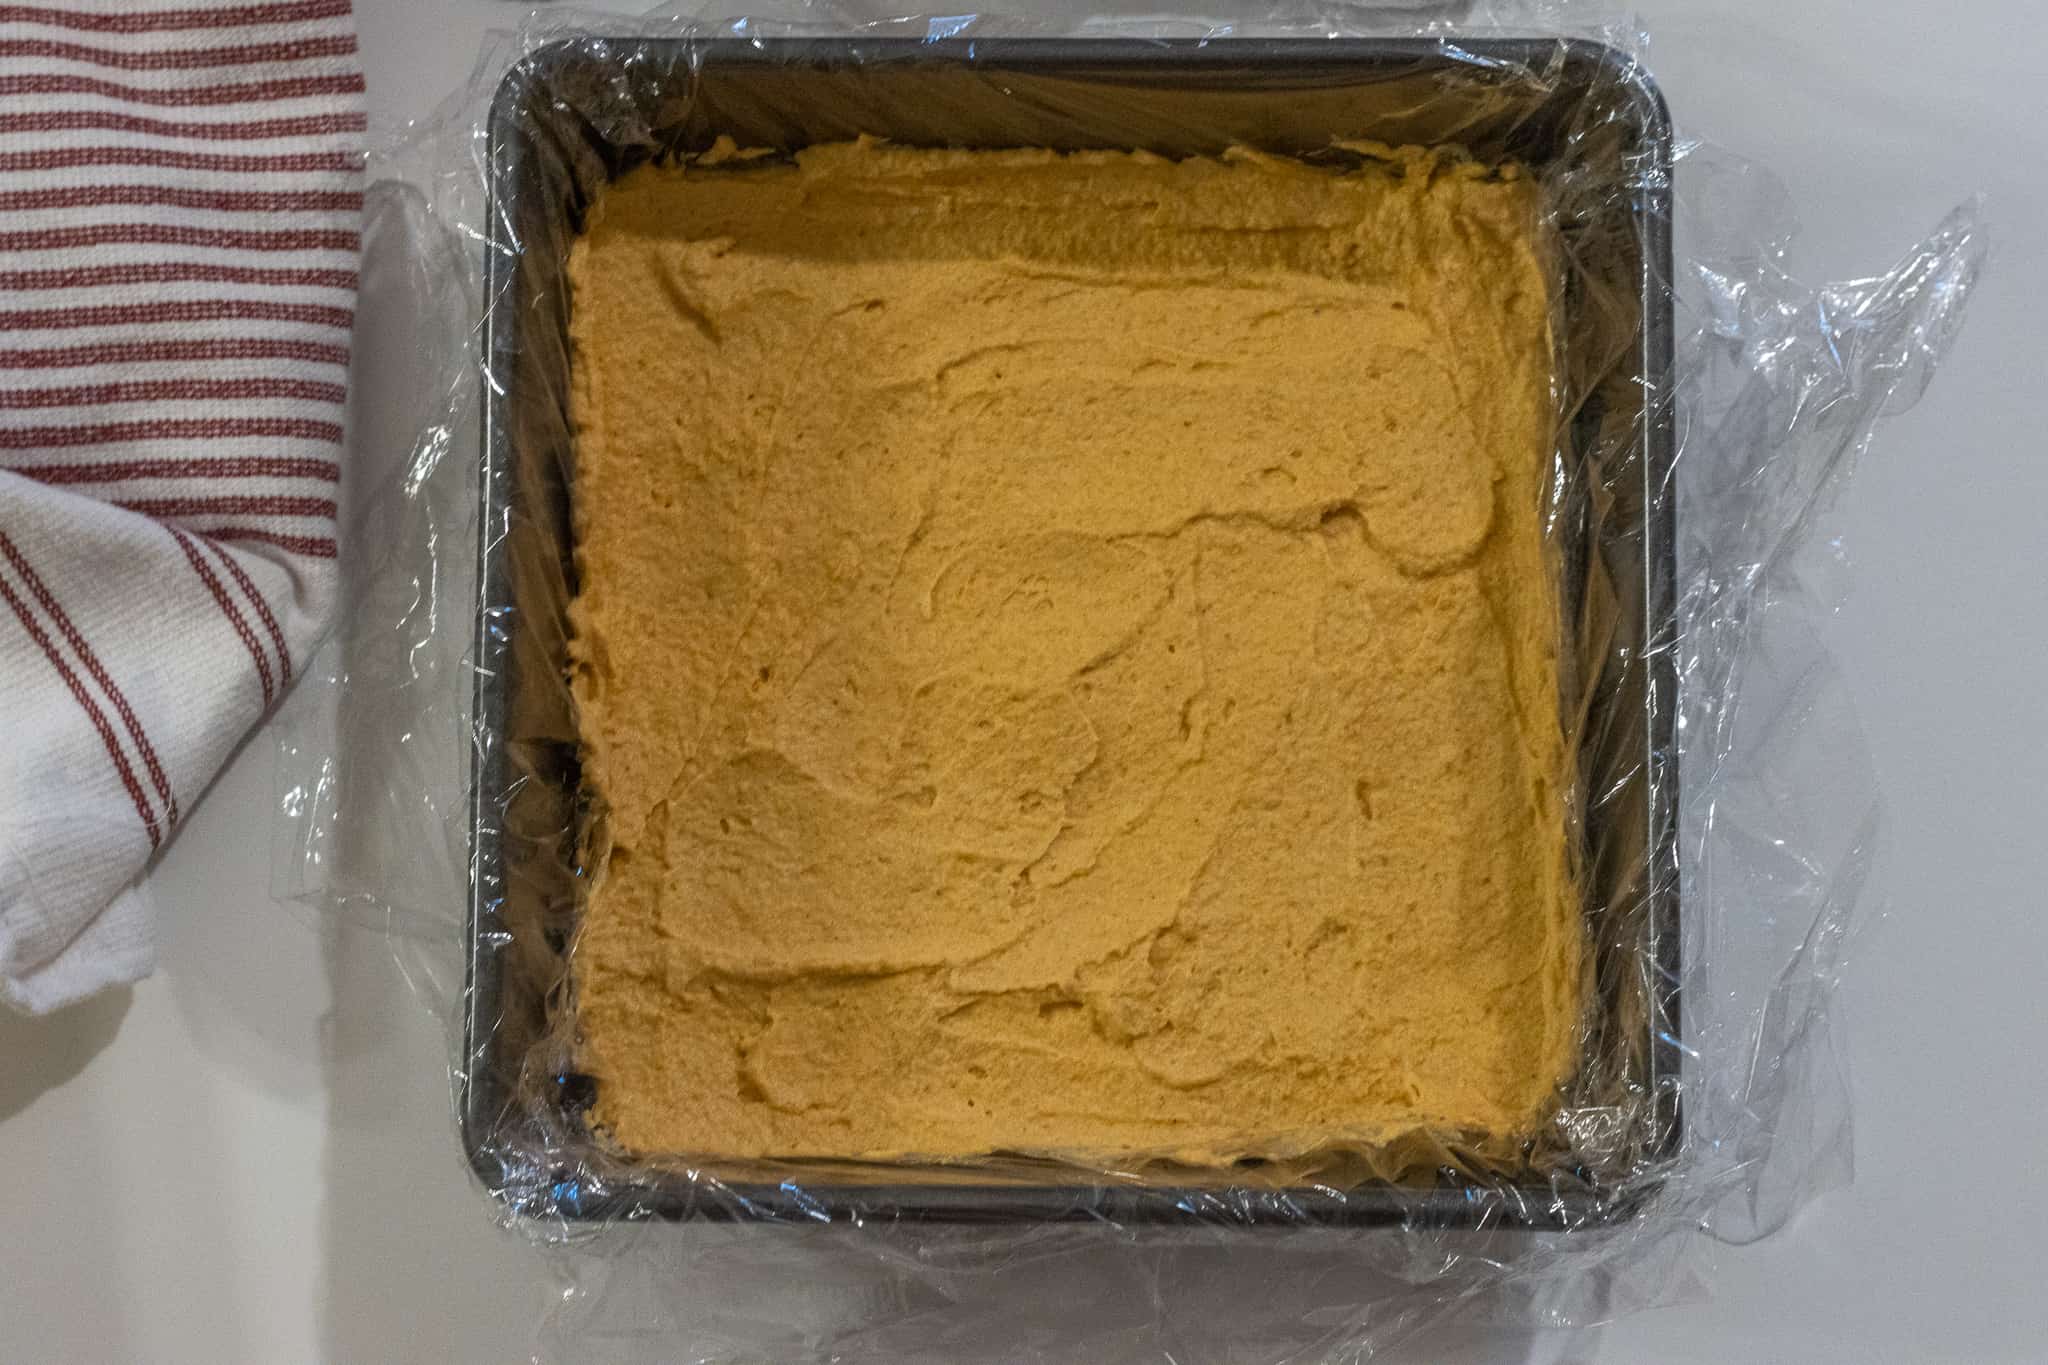 Plastic lined baking dish with a layer of whipped pumpkin filling.